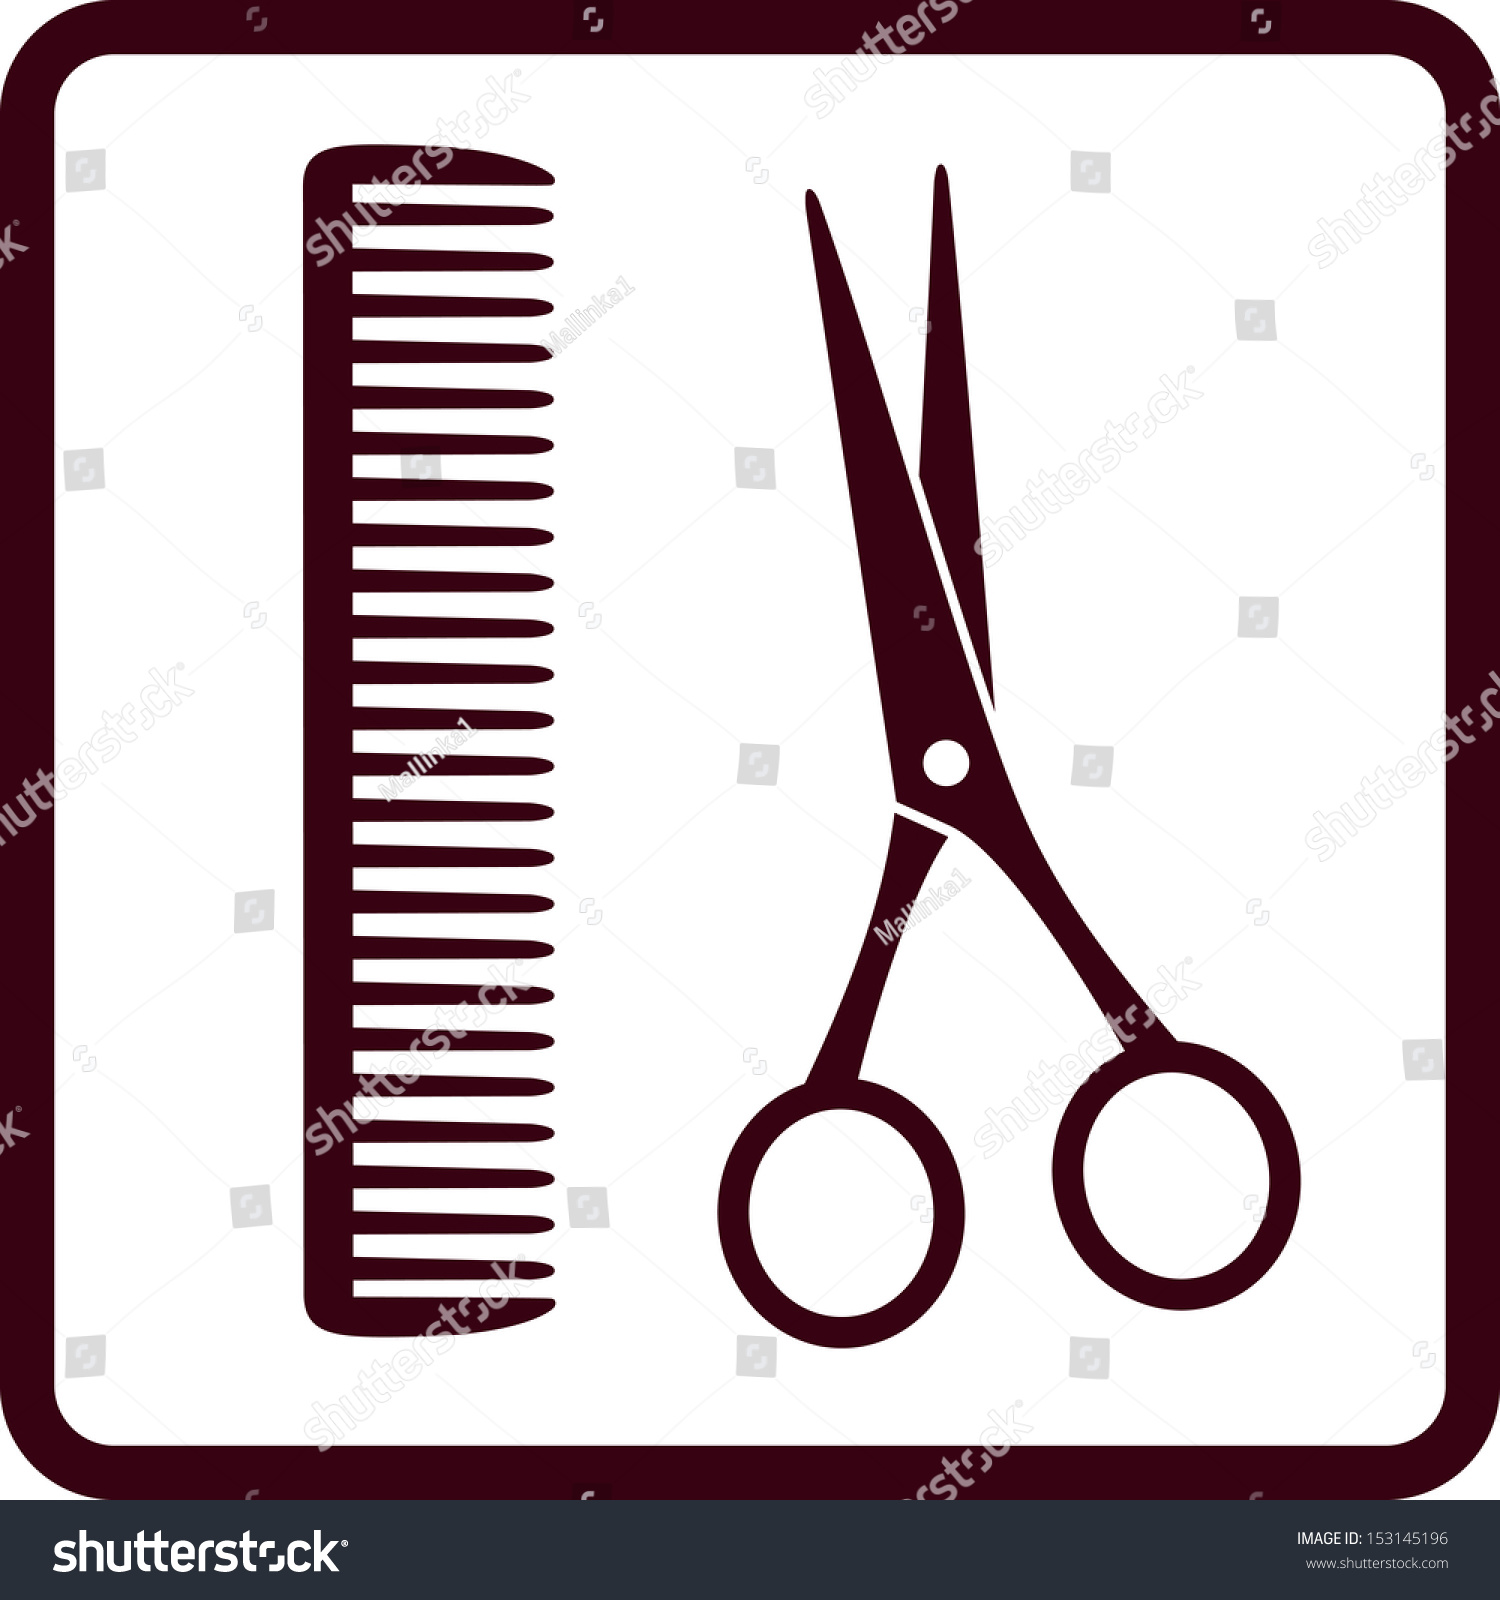 Isolated black scissors and comb minimalist style barbershop mural wallpaper 